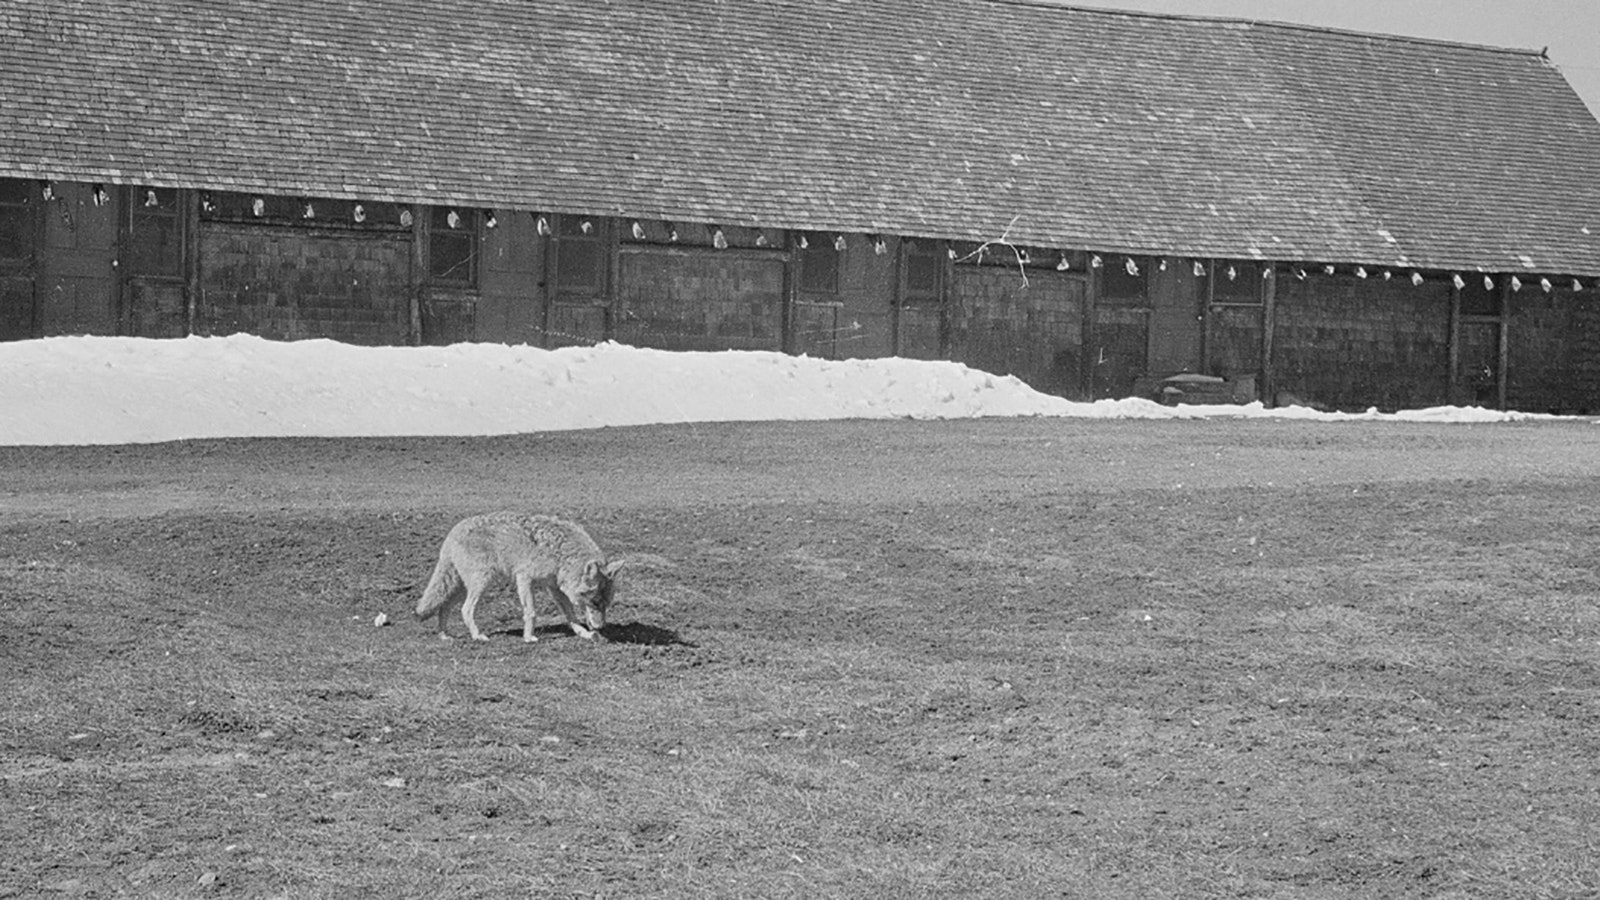 An old, toothless coyote named Jimmy gobbles pancakes near the Old Faithful in Yellowstone National Park in February 1955.